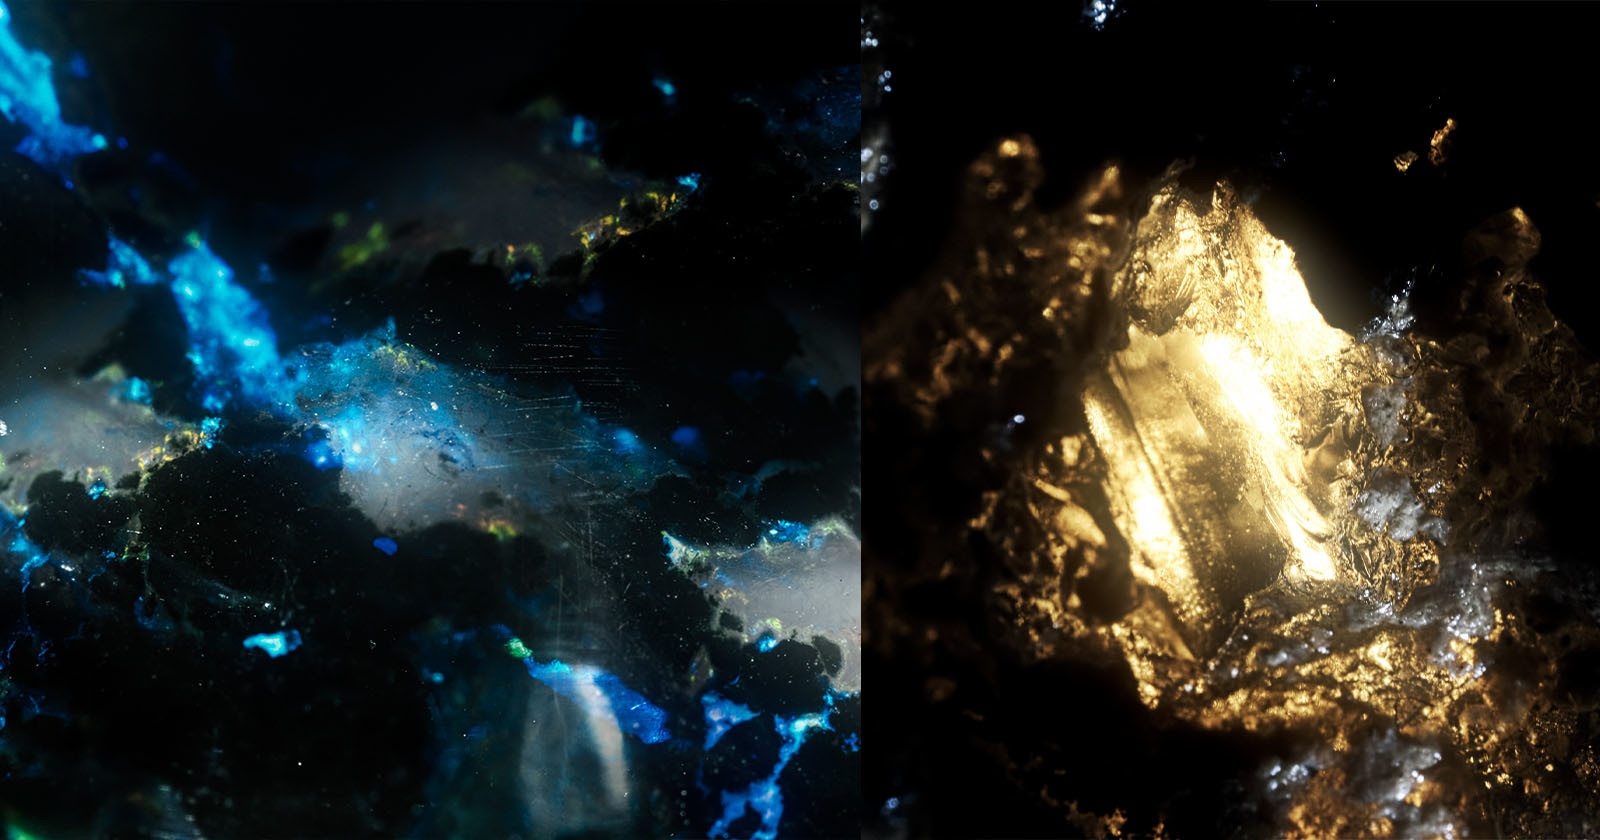 A Dazzling Macro Project Featuring the Dancing Light Reflected in Opals